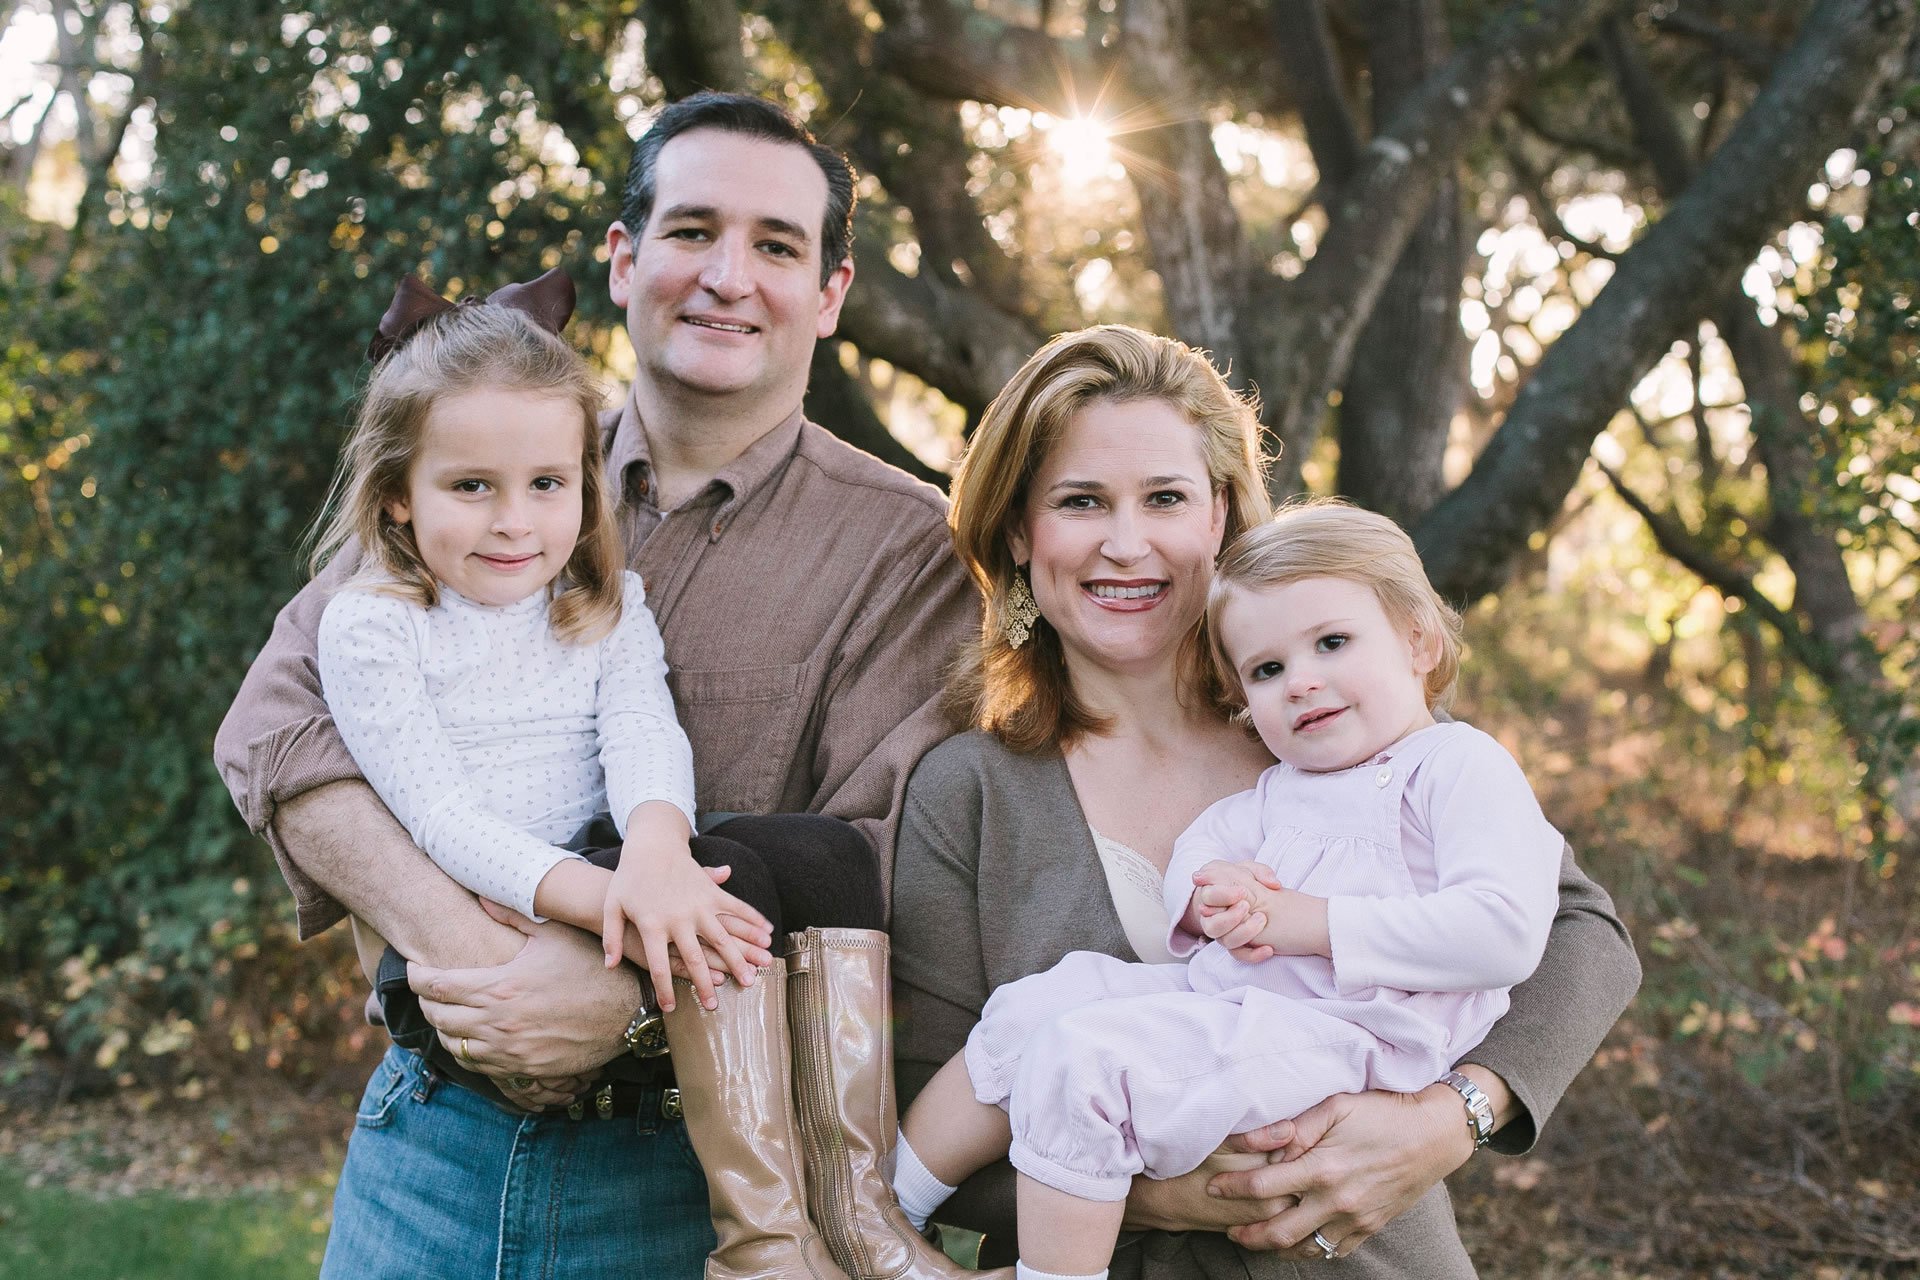 Cruz visit is a rare opportunity for Trussville area